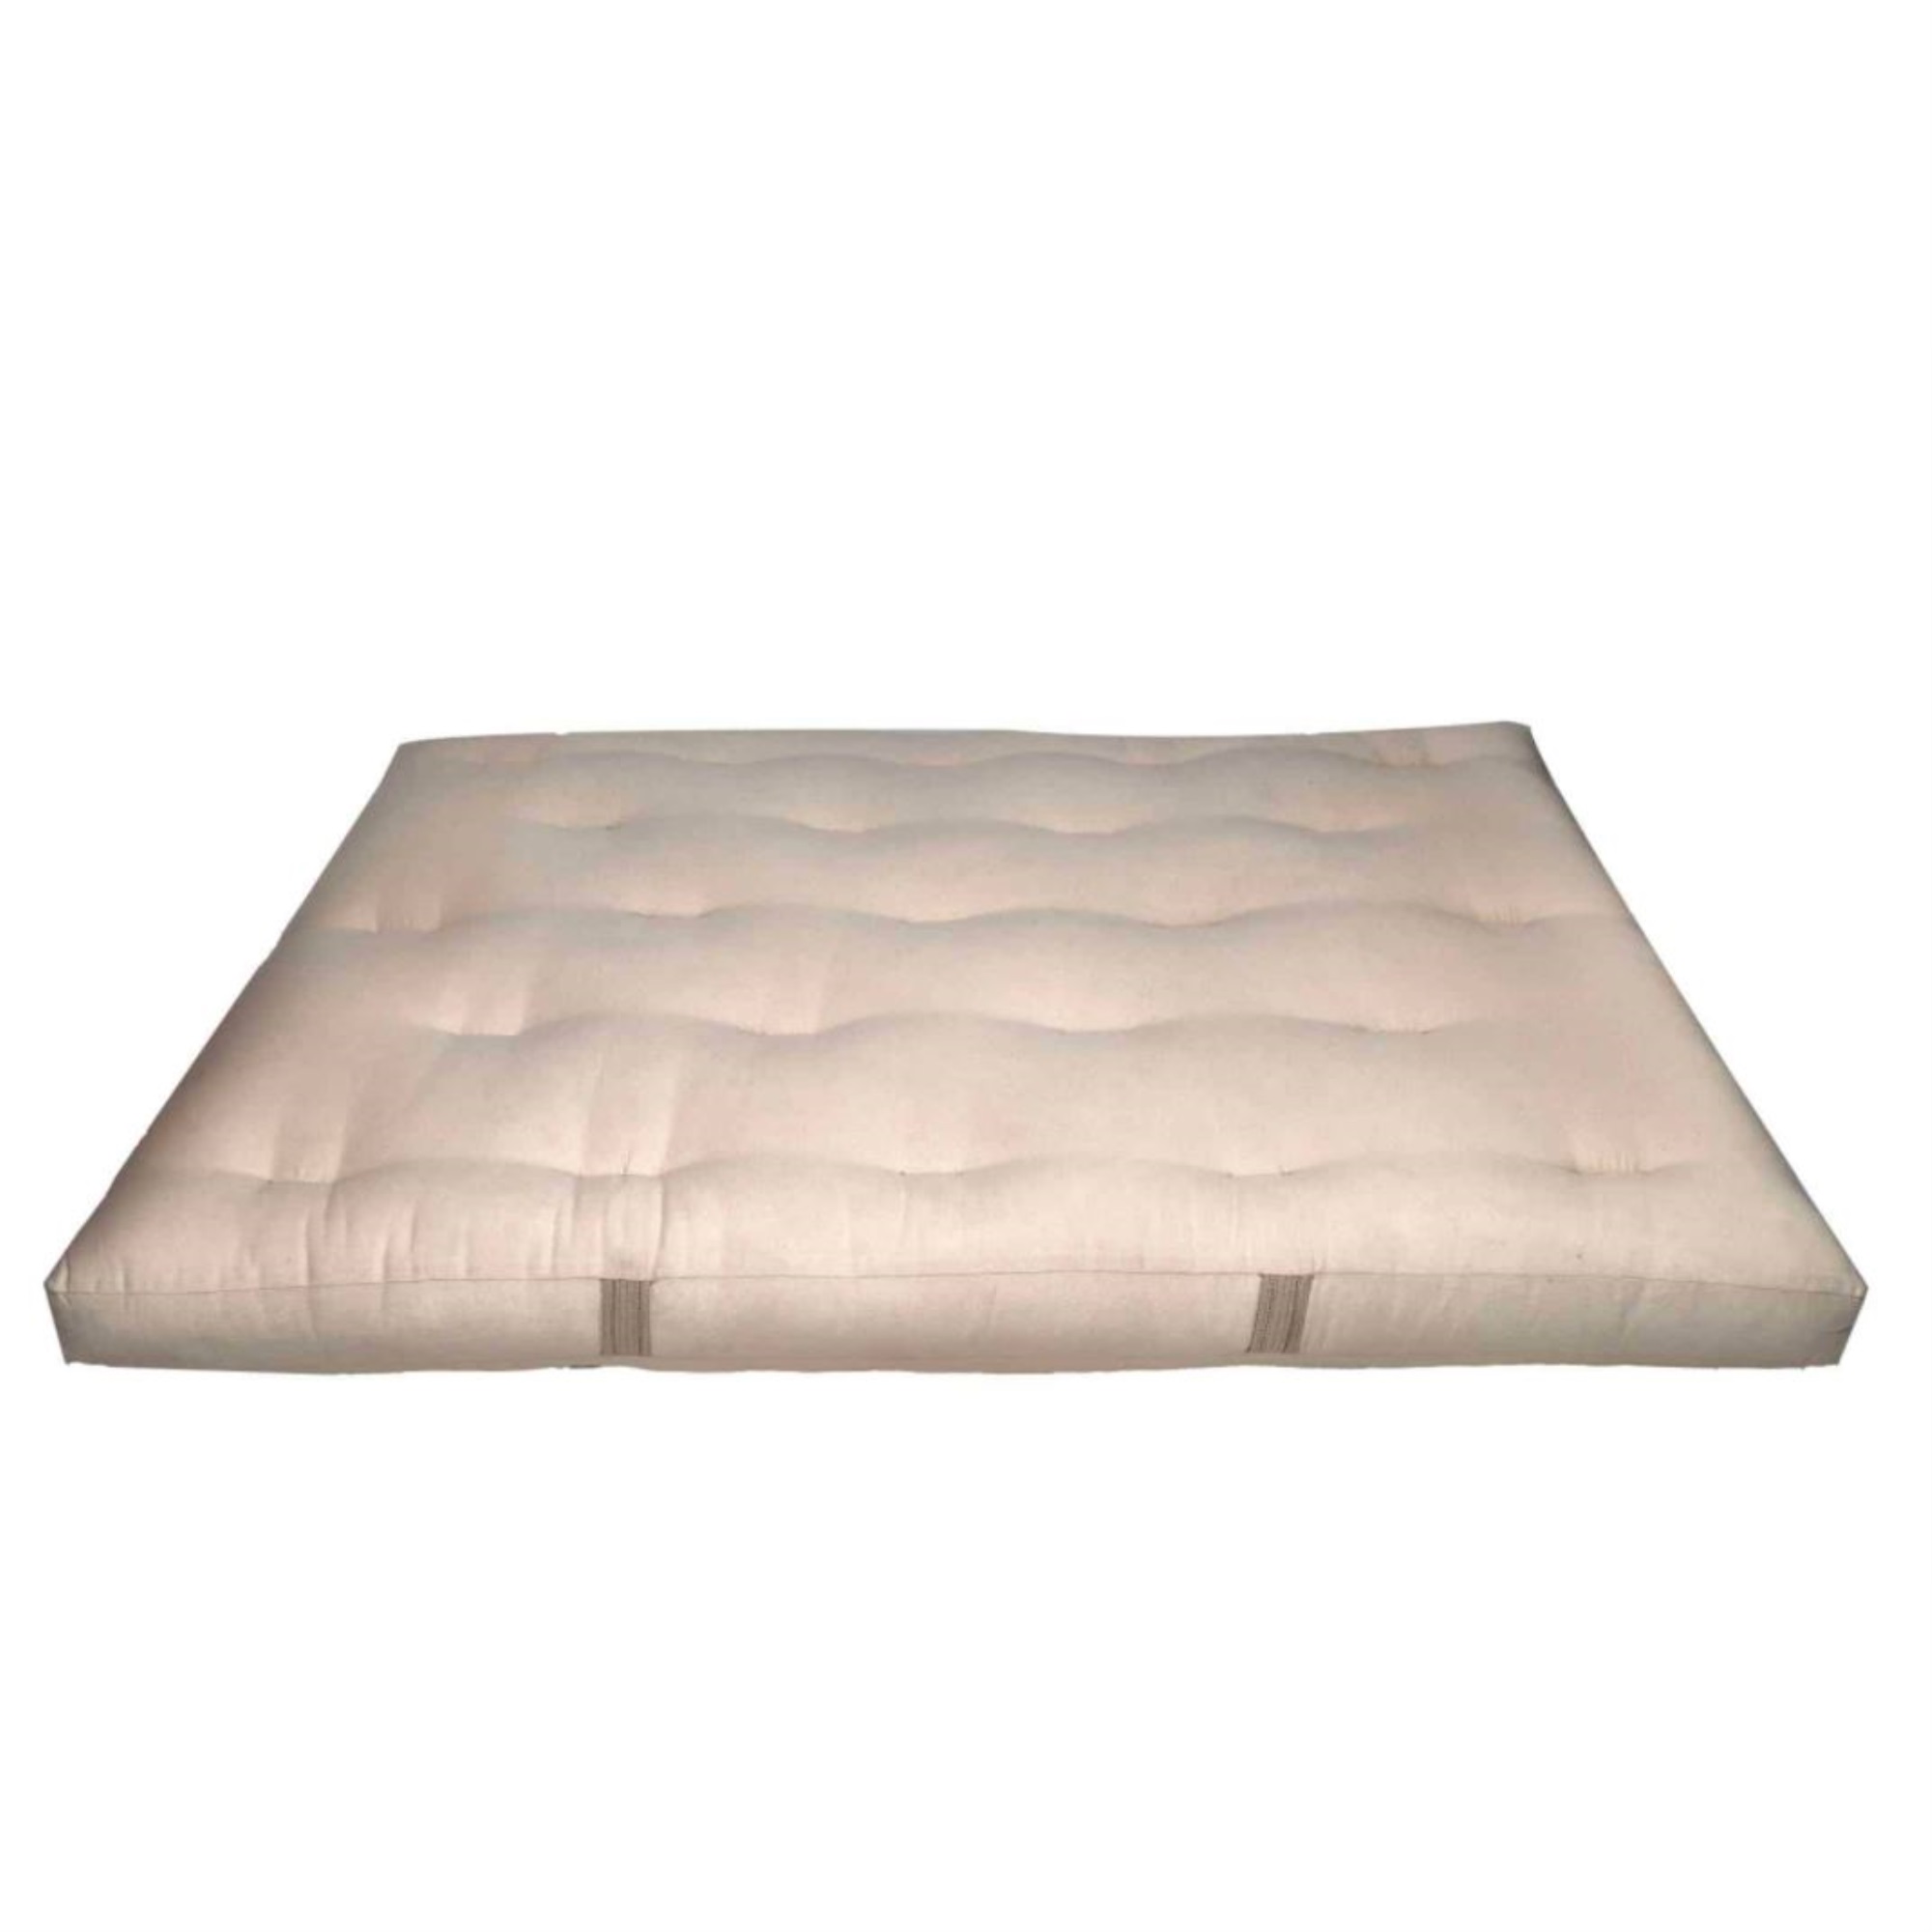 White Lotus Home Green Cotton  King 7" Mattress with 2" Foam core in 100% Cotton Fabric Case